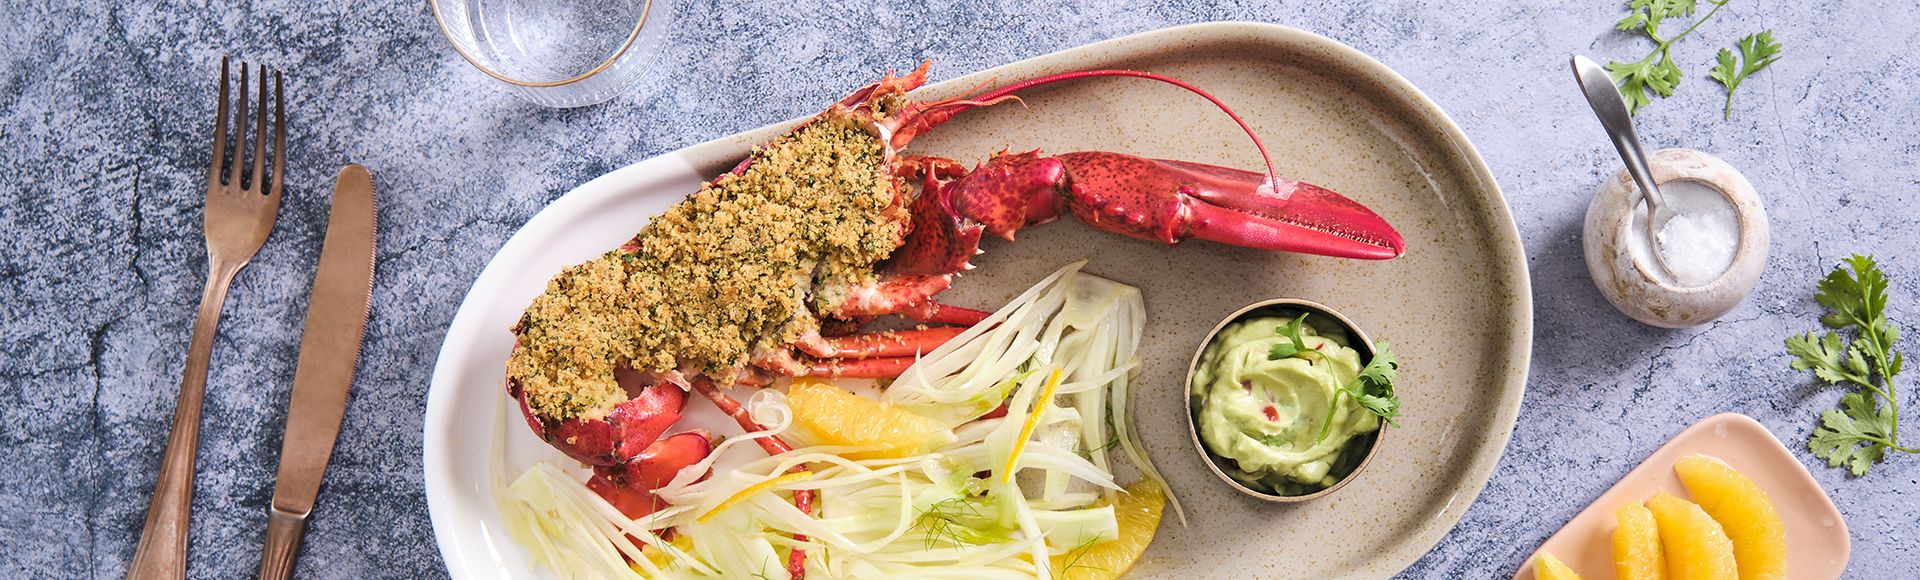 Lobster gratin and fennel salad with oranges and guacamole